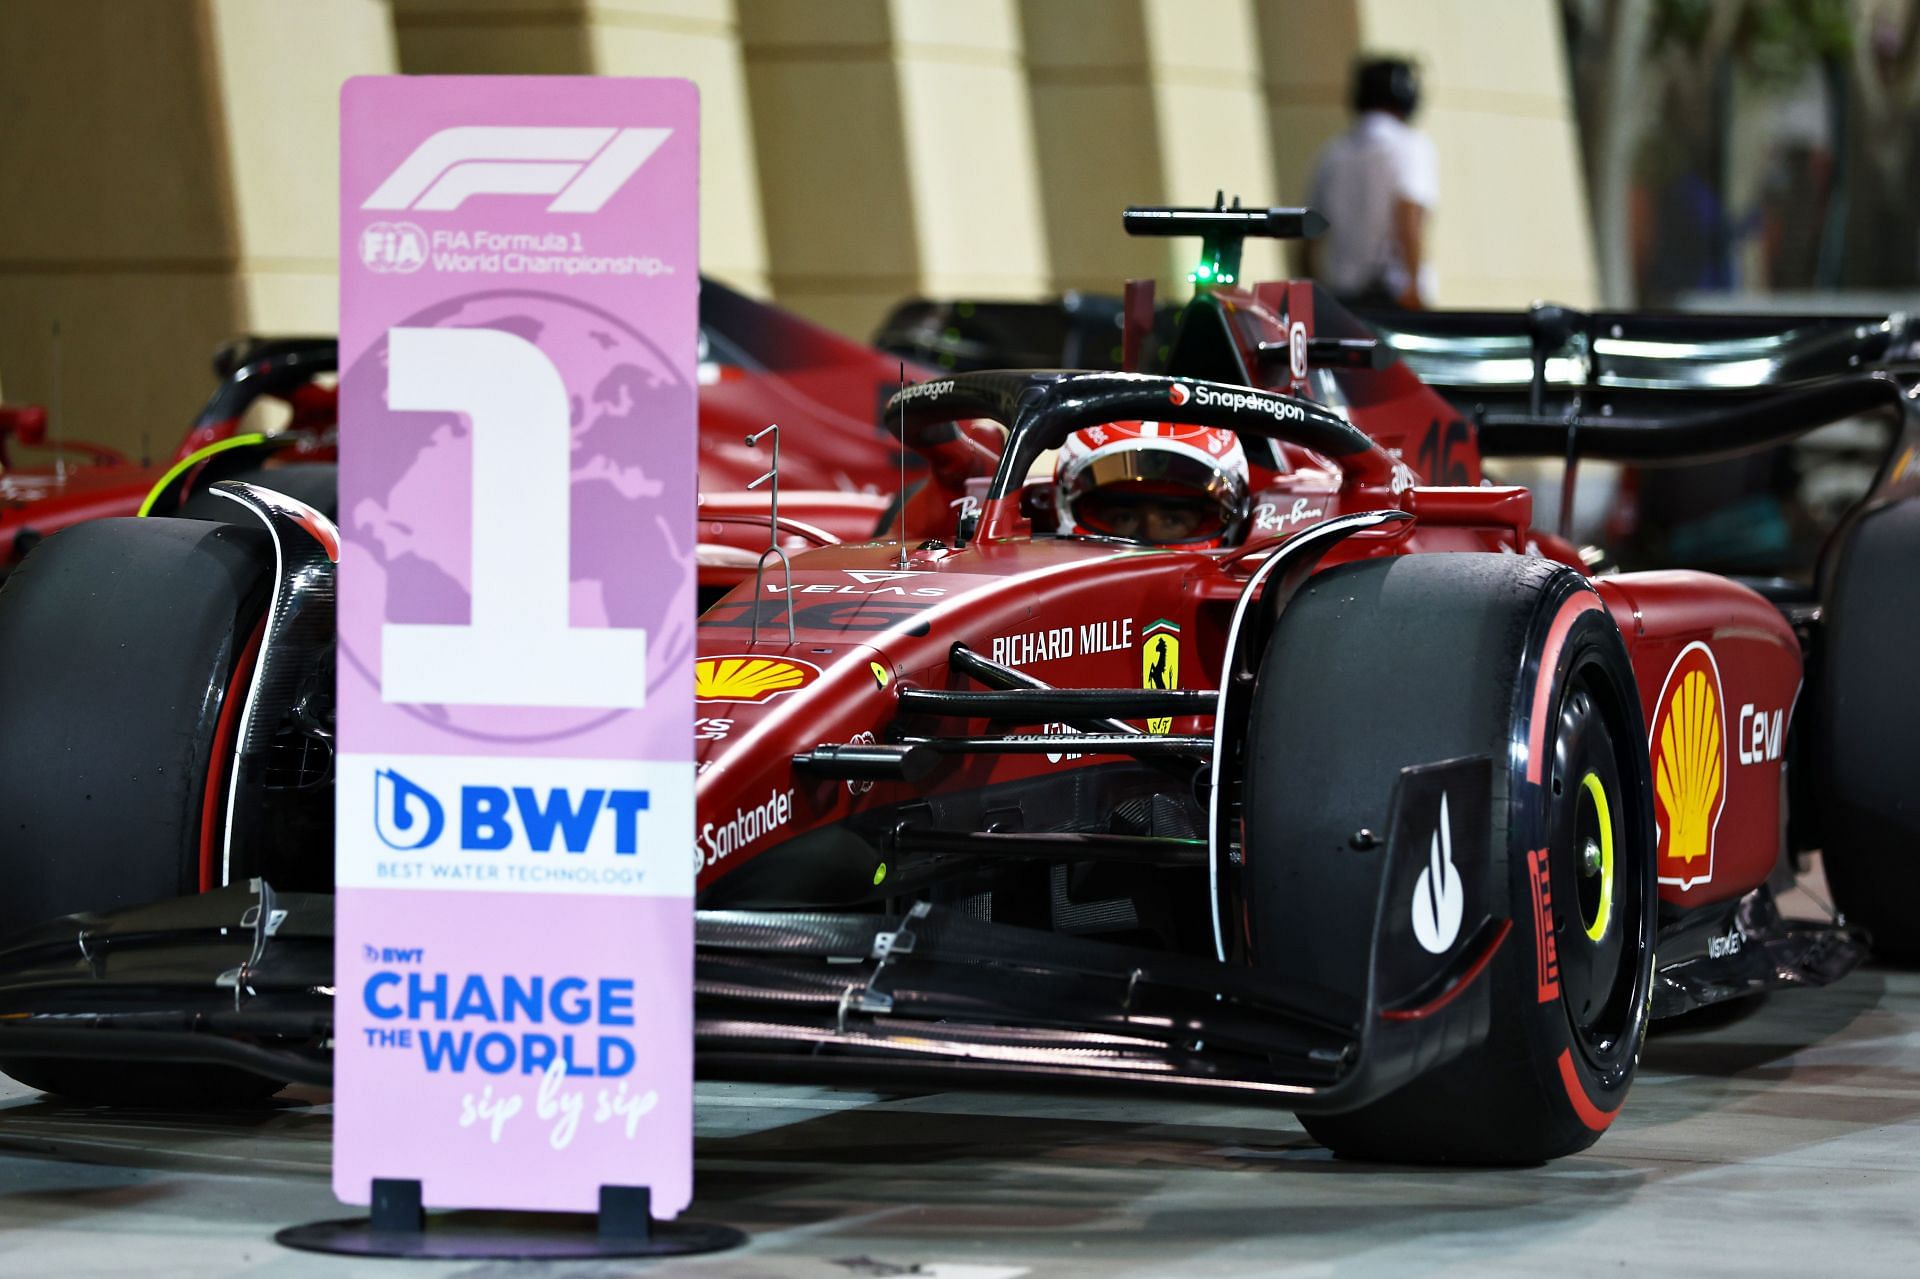 Charles Leclerc at the F1 Grand Prix of Bahrain - Qualifying